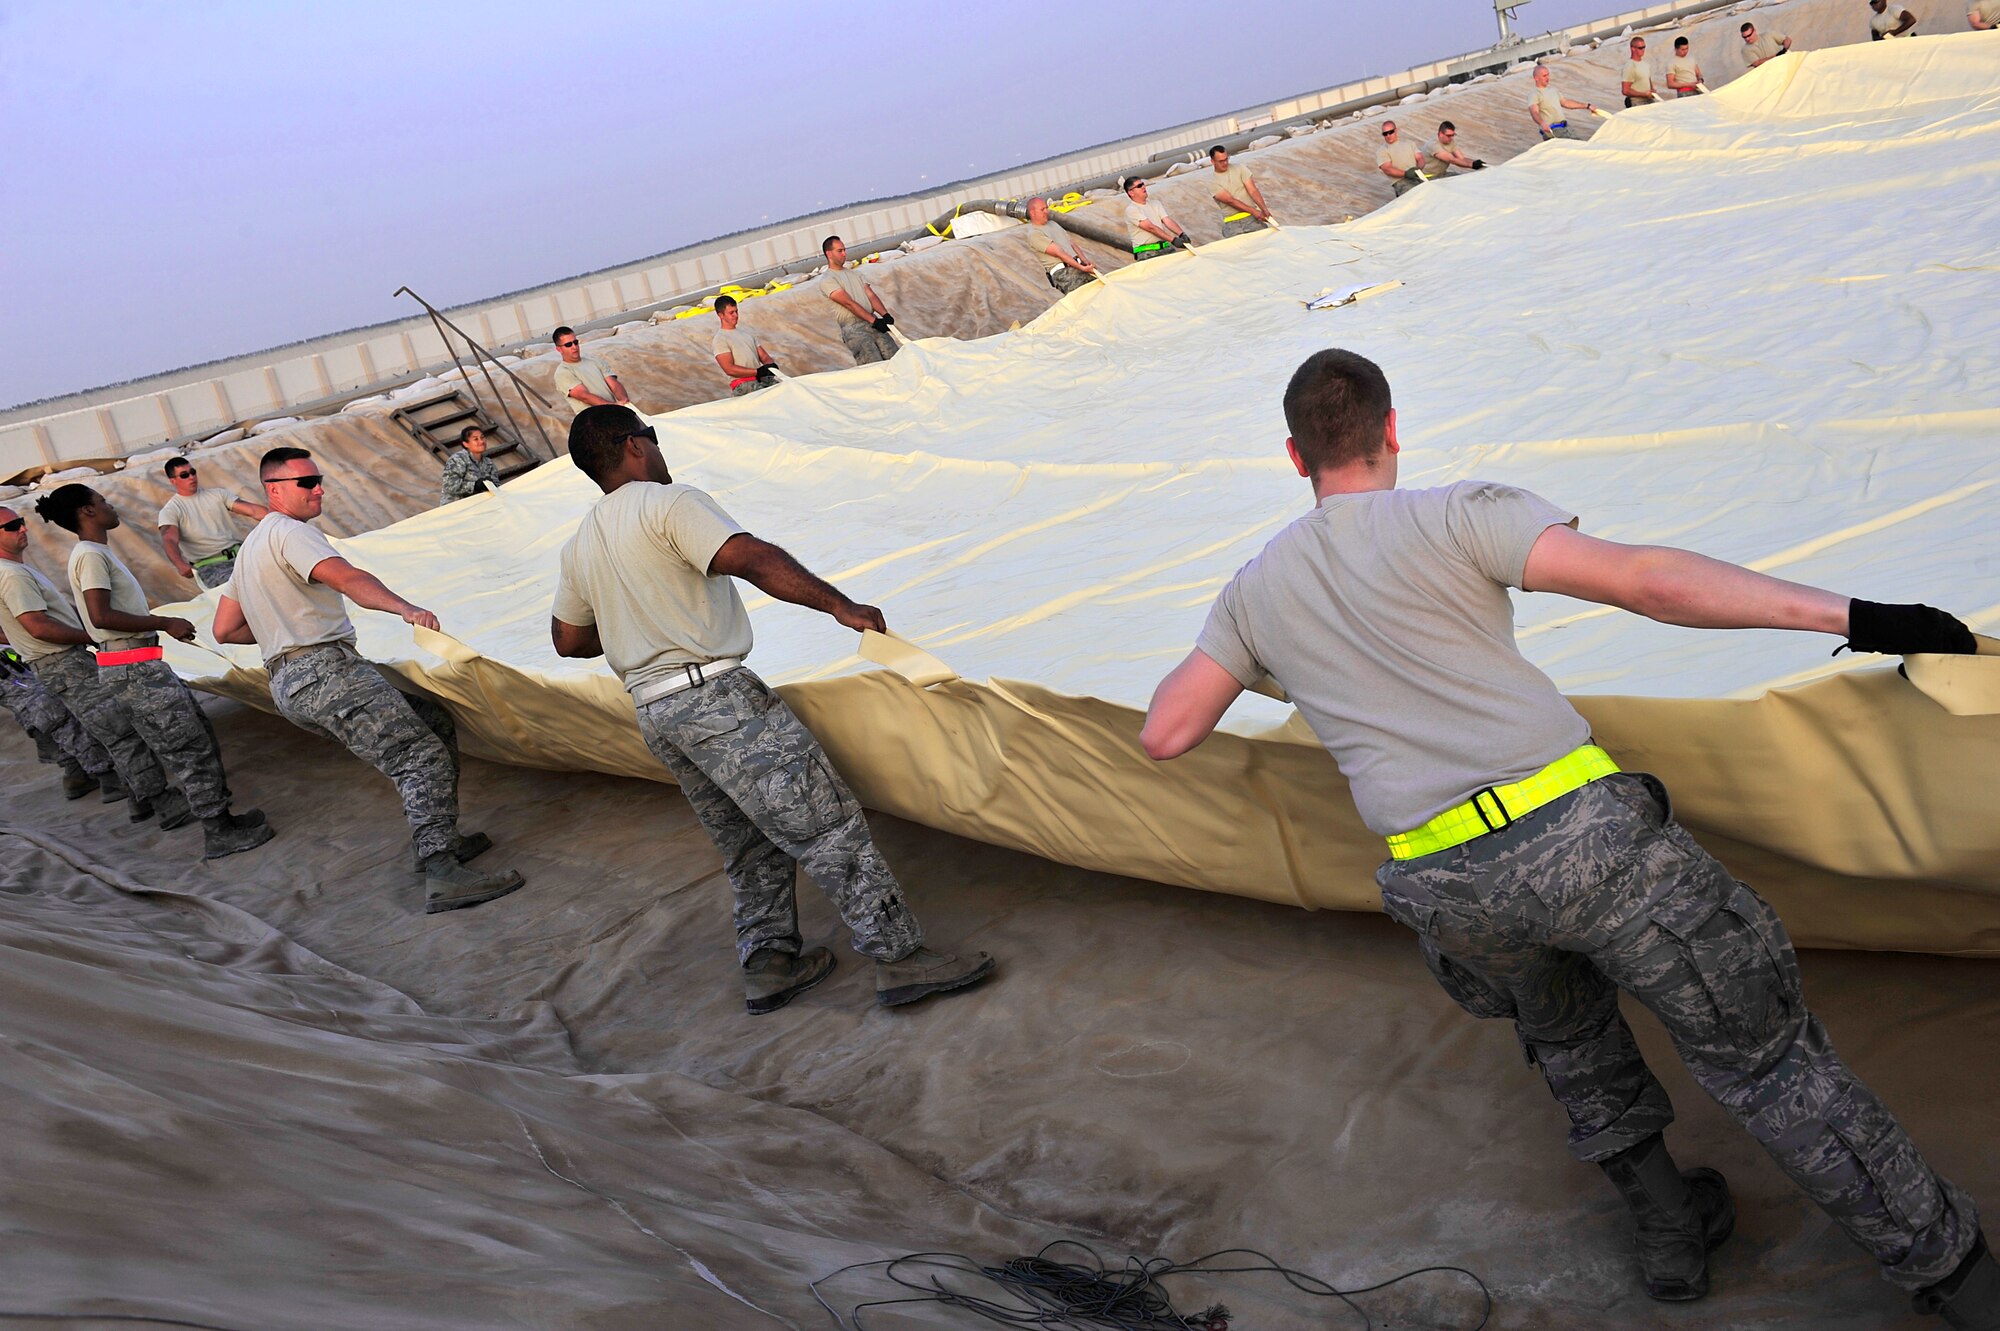 Airmen assigned to the 380th Air Expeditionary Logistics Readiness Squadron arrange a 200,000 gallon fuel bladder inside a containment area at an undisclosed location in Southwest Asia April 4, 2013. Sixty Airmen operate the fuels farm, moving anywhere from 300,000 to 600,000 gallons of fuel each day. (U.S. Air Force photo by Tech. Sgt. Christina M. Styer/Released)